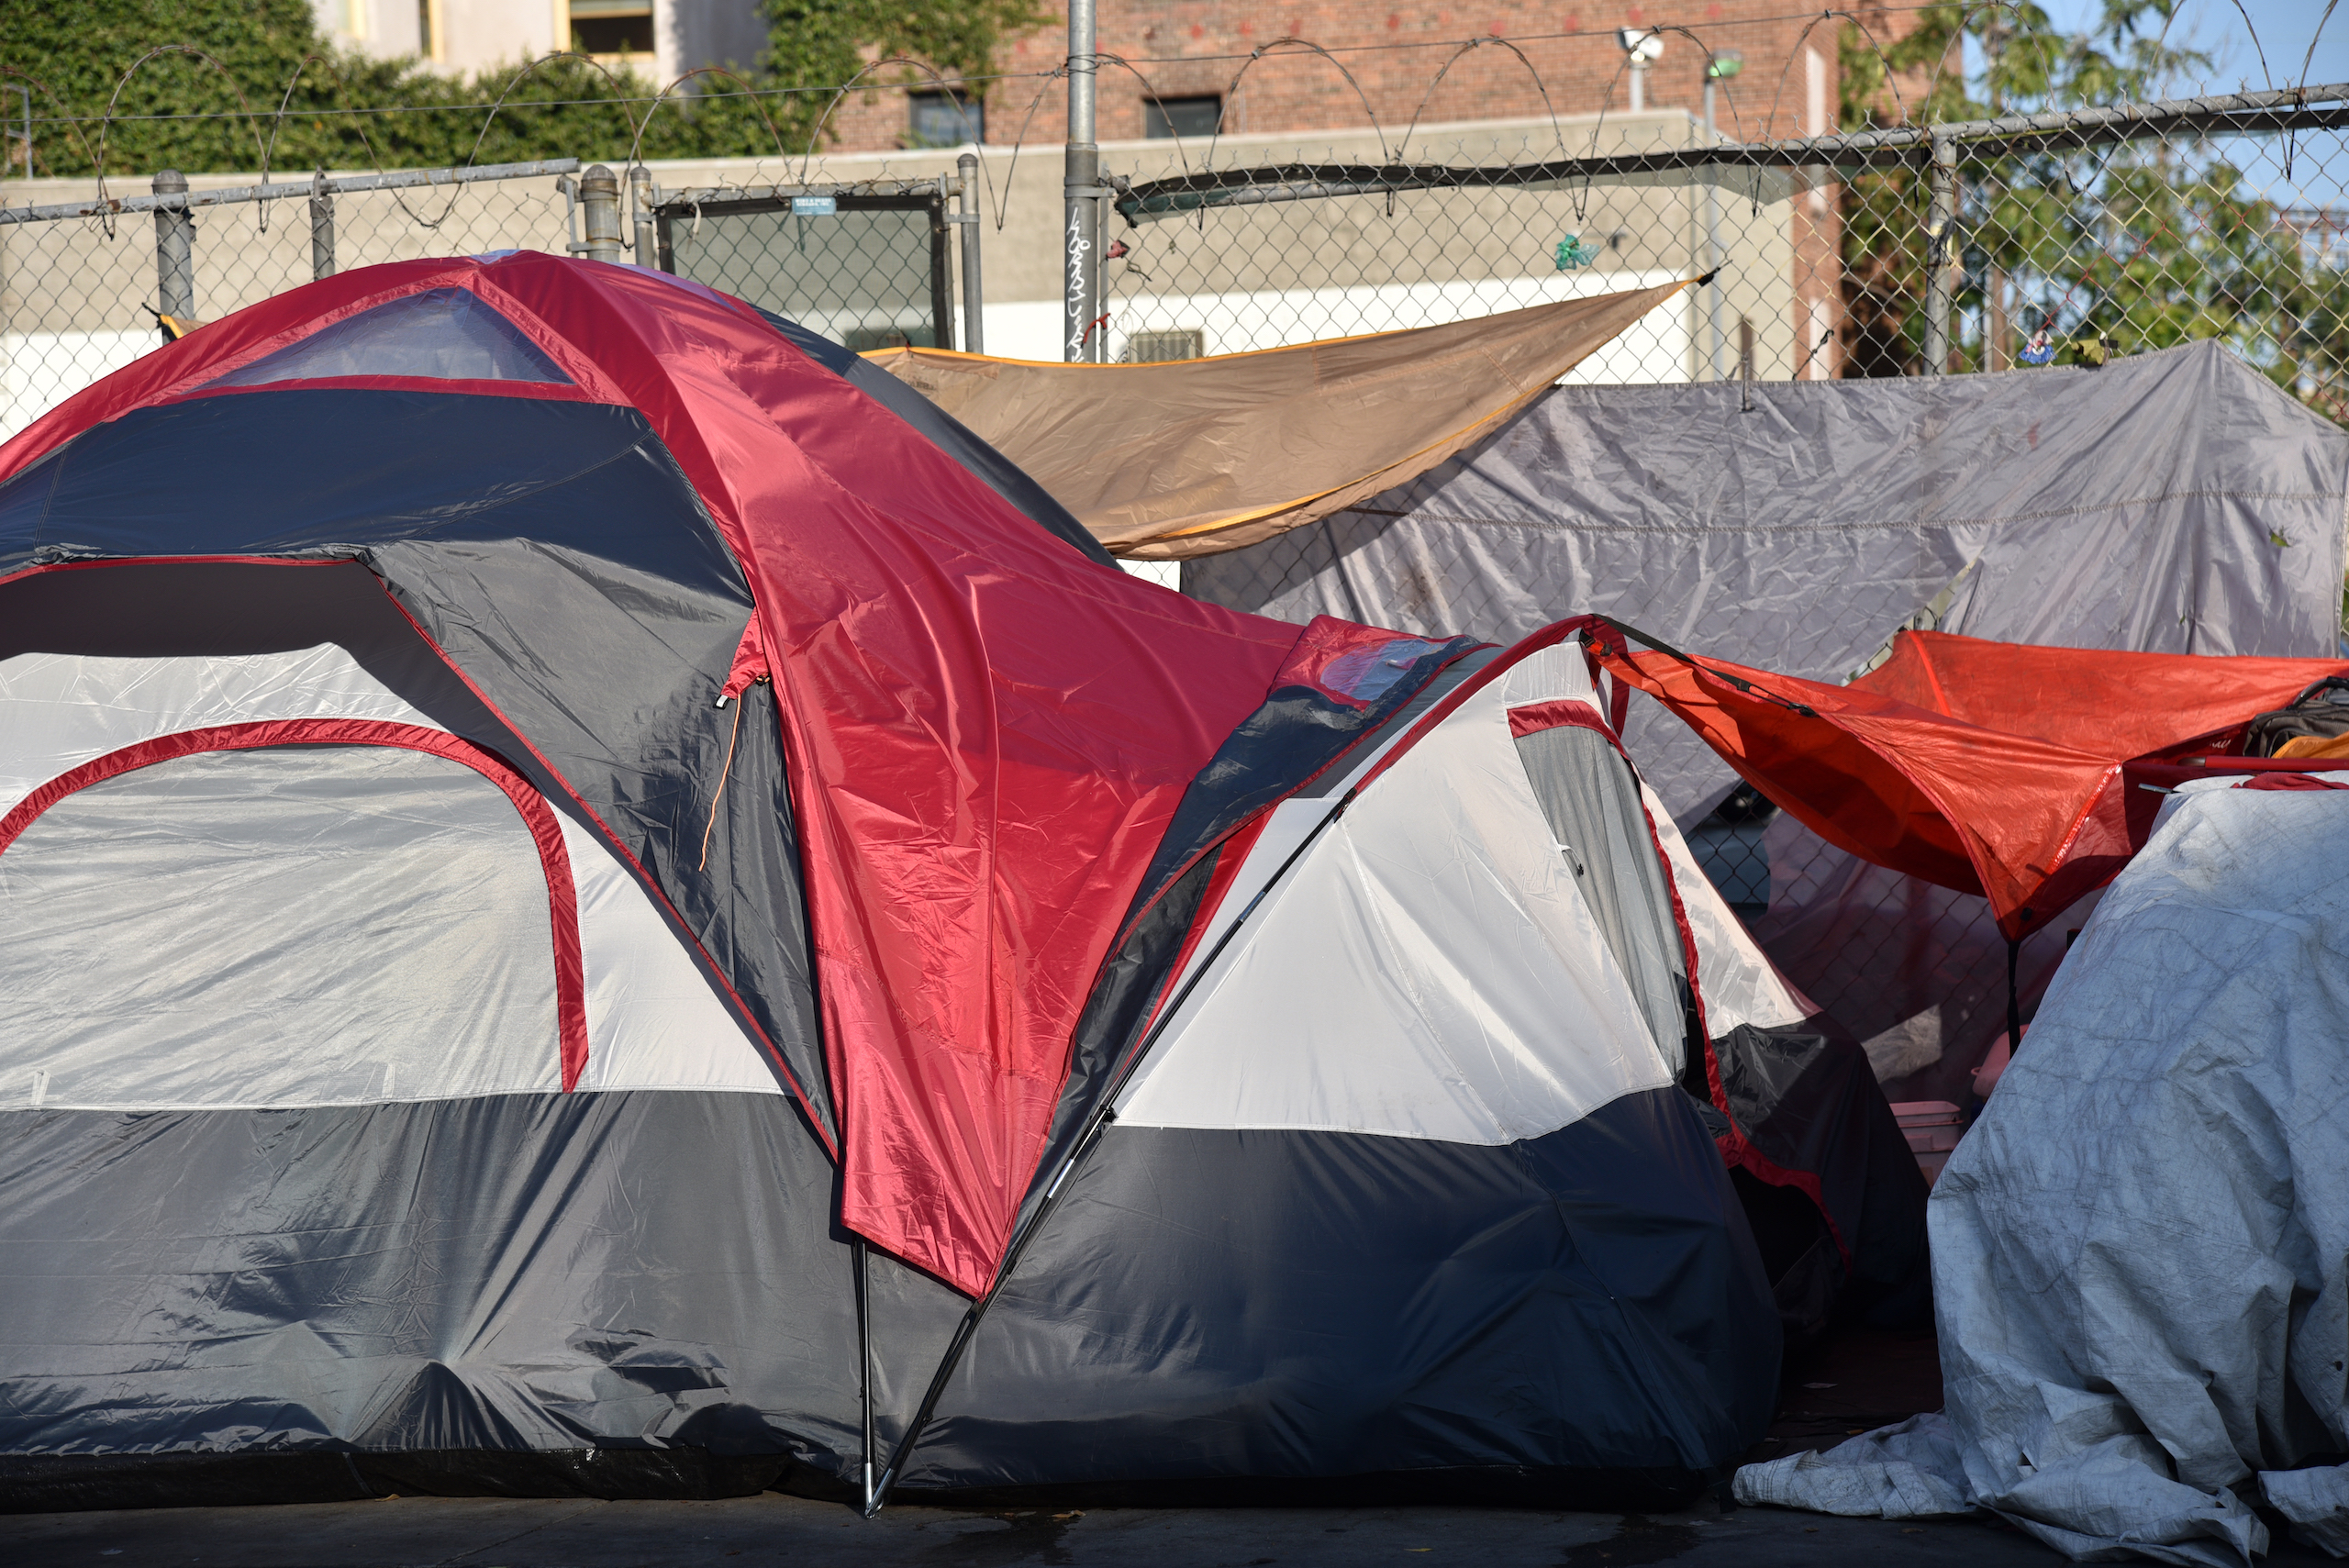 Tents of the homeless on the streets of Phoenix